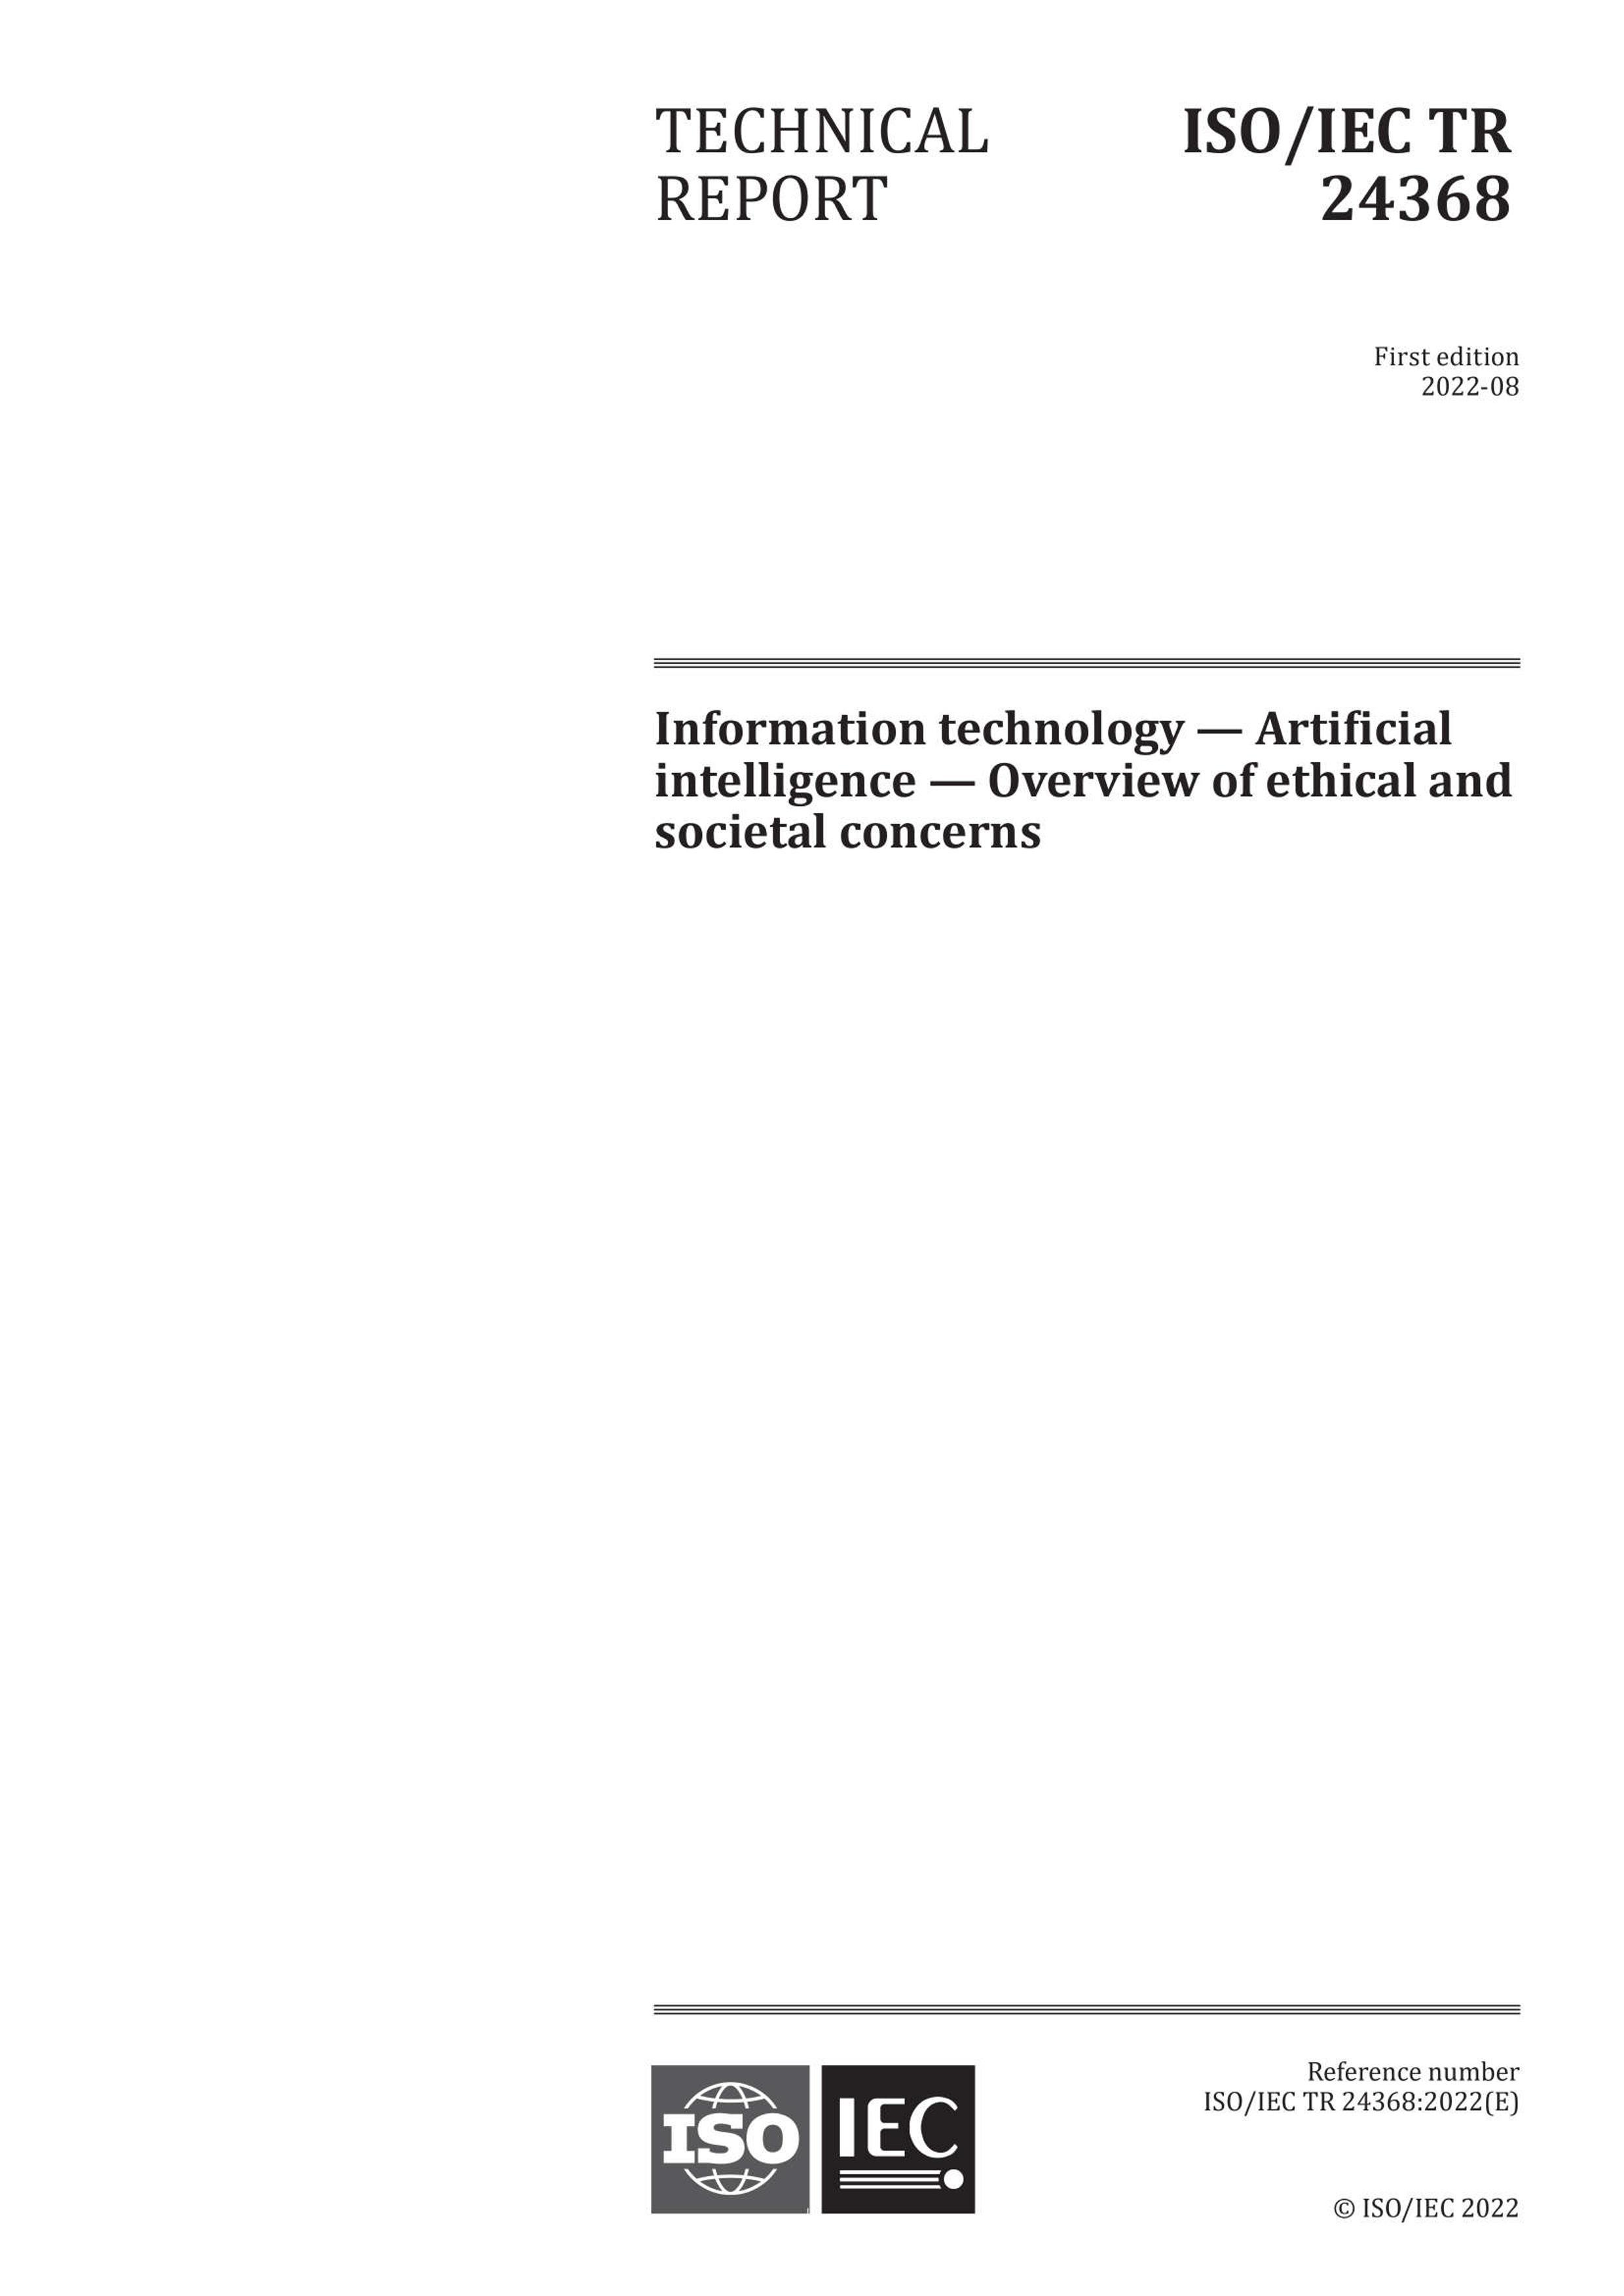 ISO IEC TR 24368-2022 Information technology  Artificial intelligence  Overview of ethical and societal concerns.pdf1ҳ